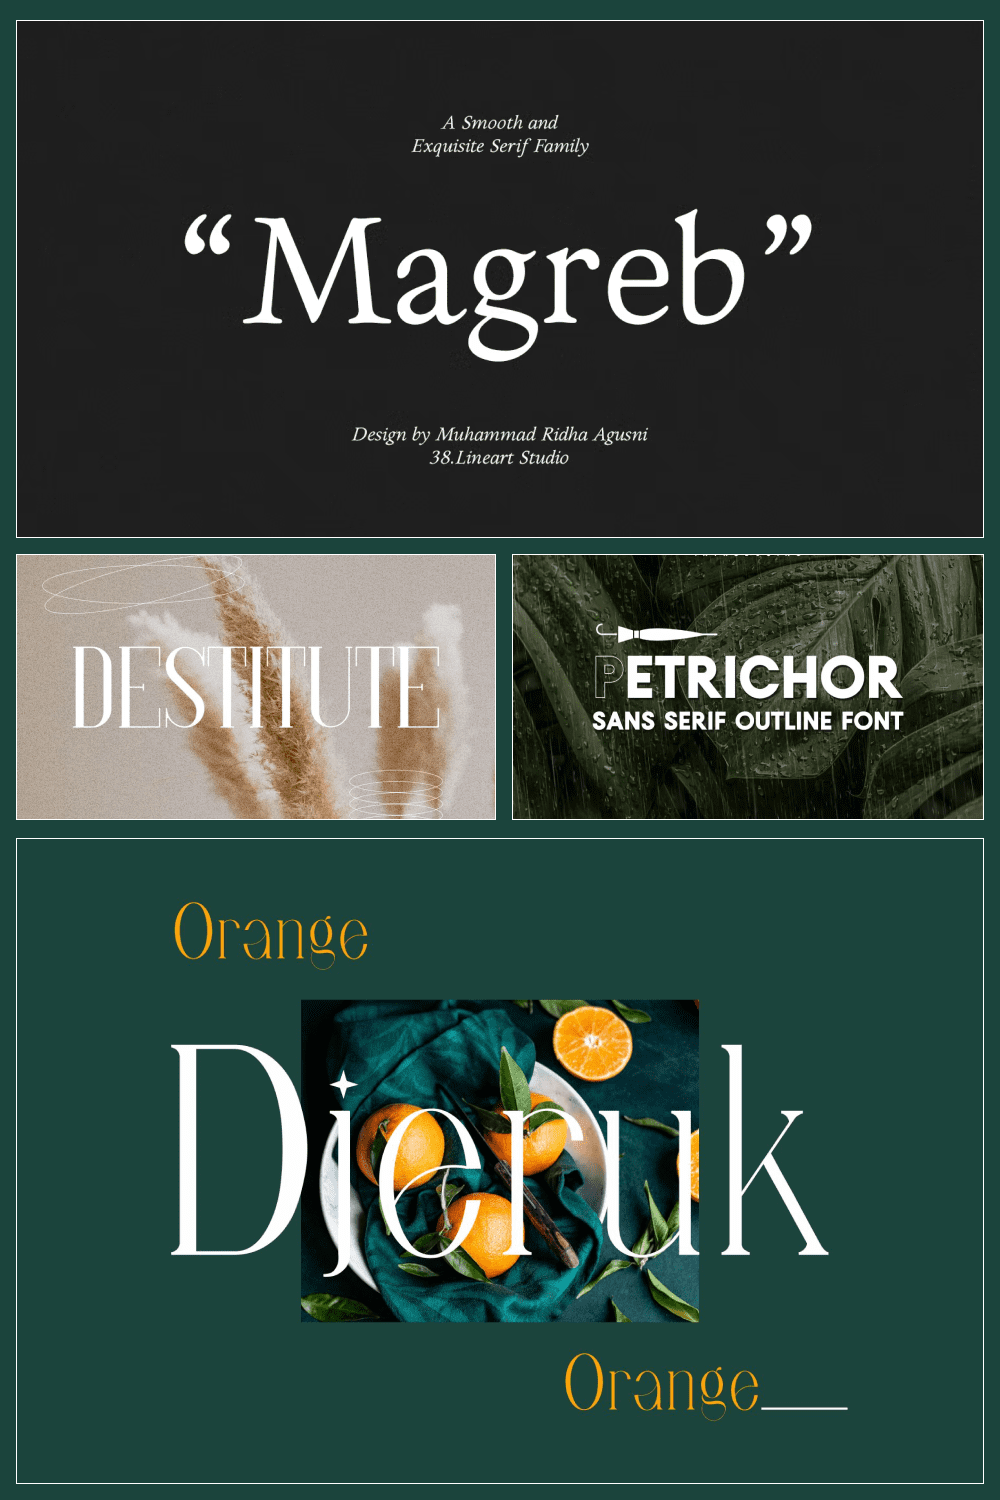 Variants of writing fonts on different backgrounds.